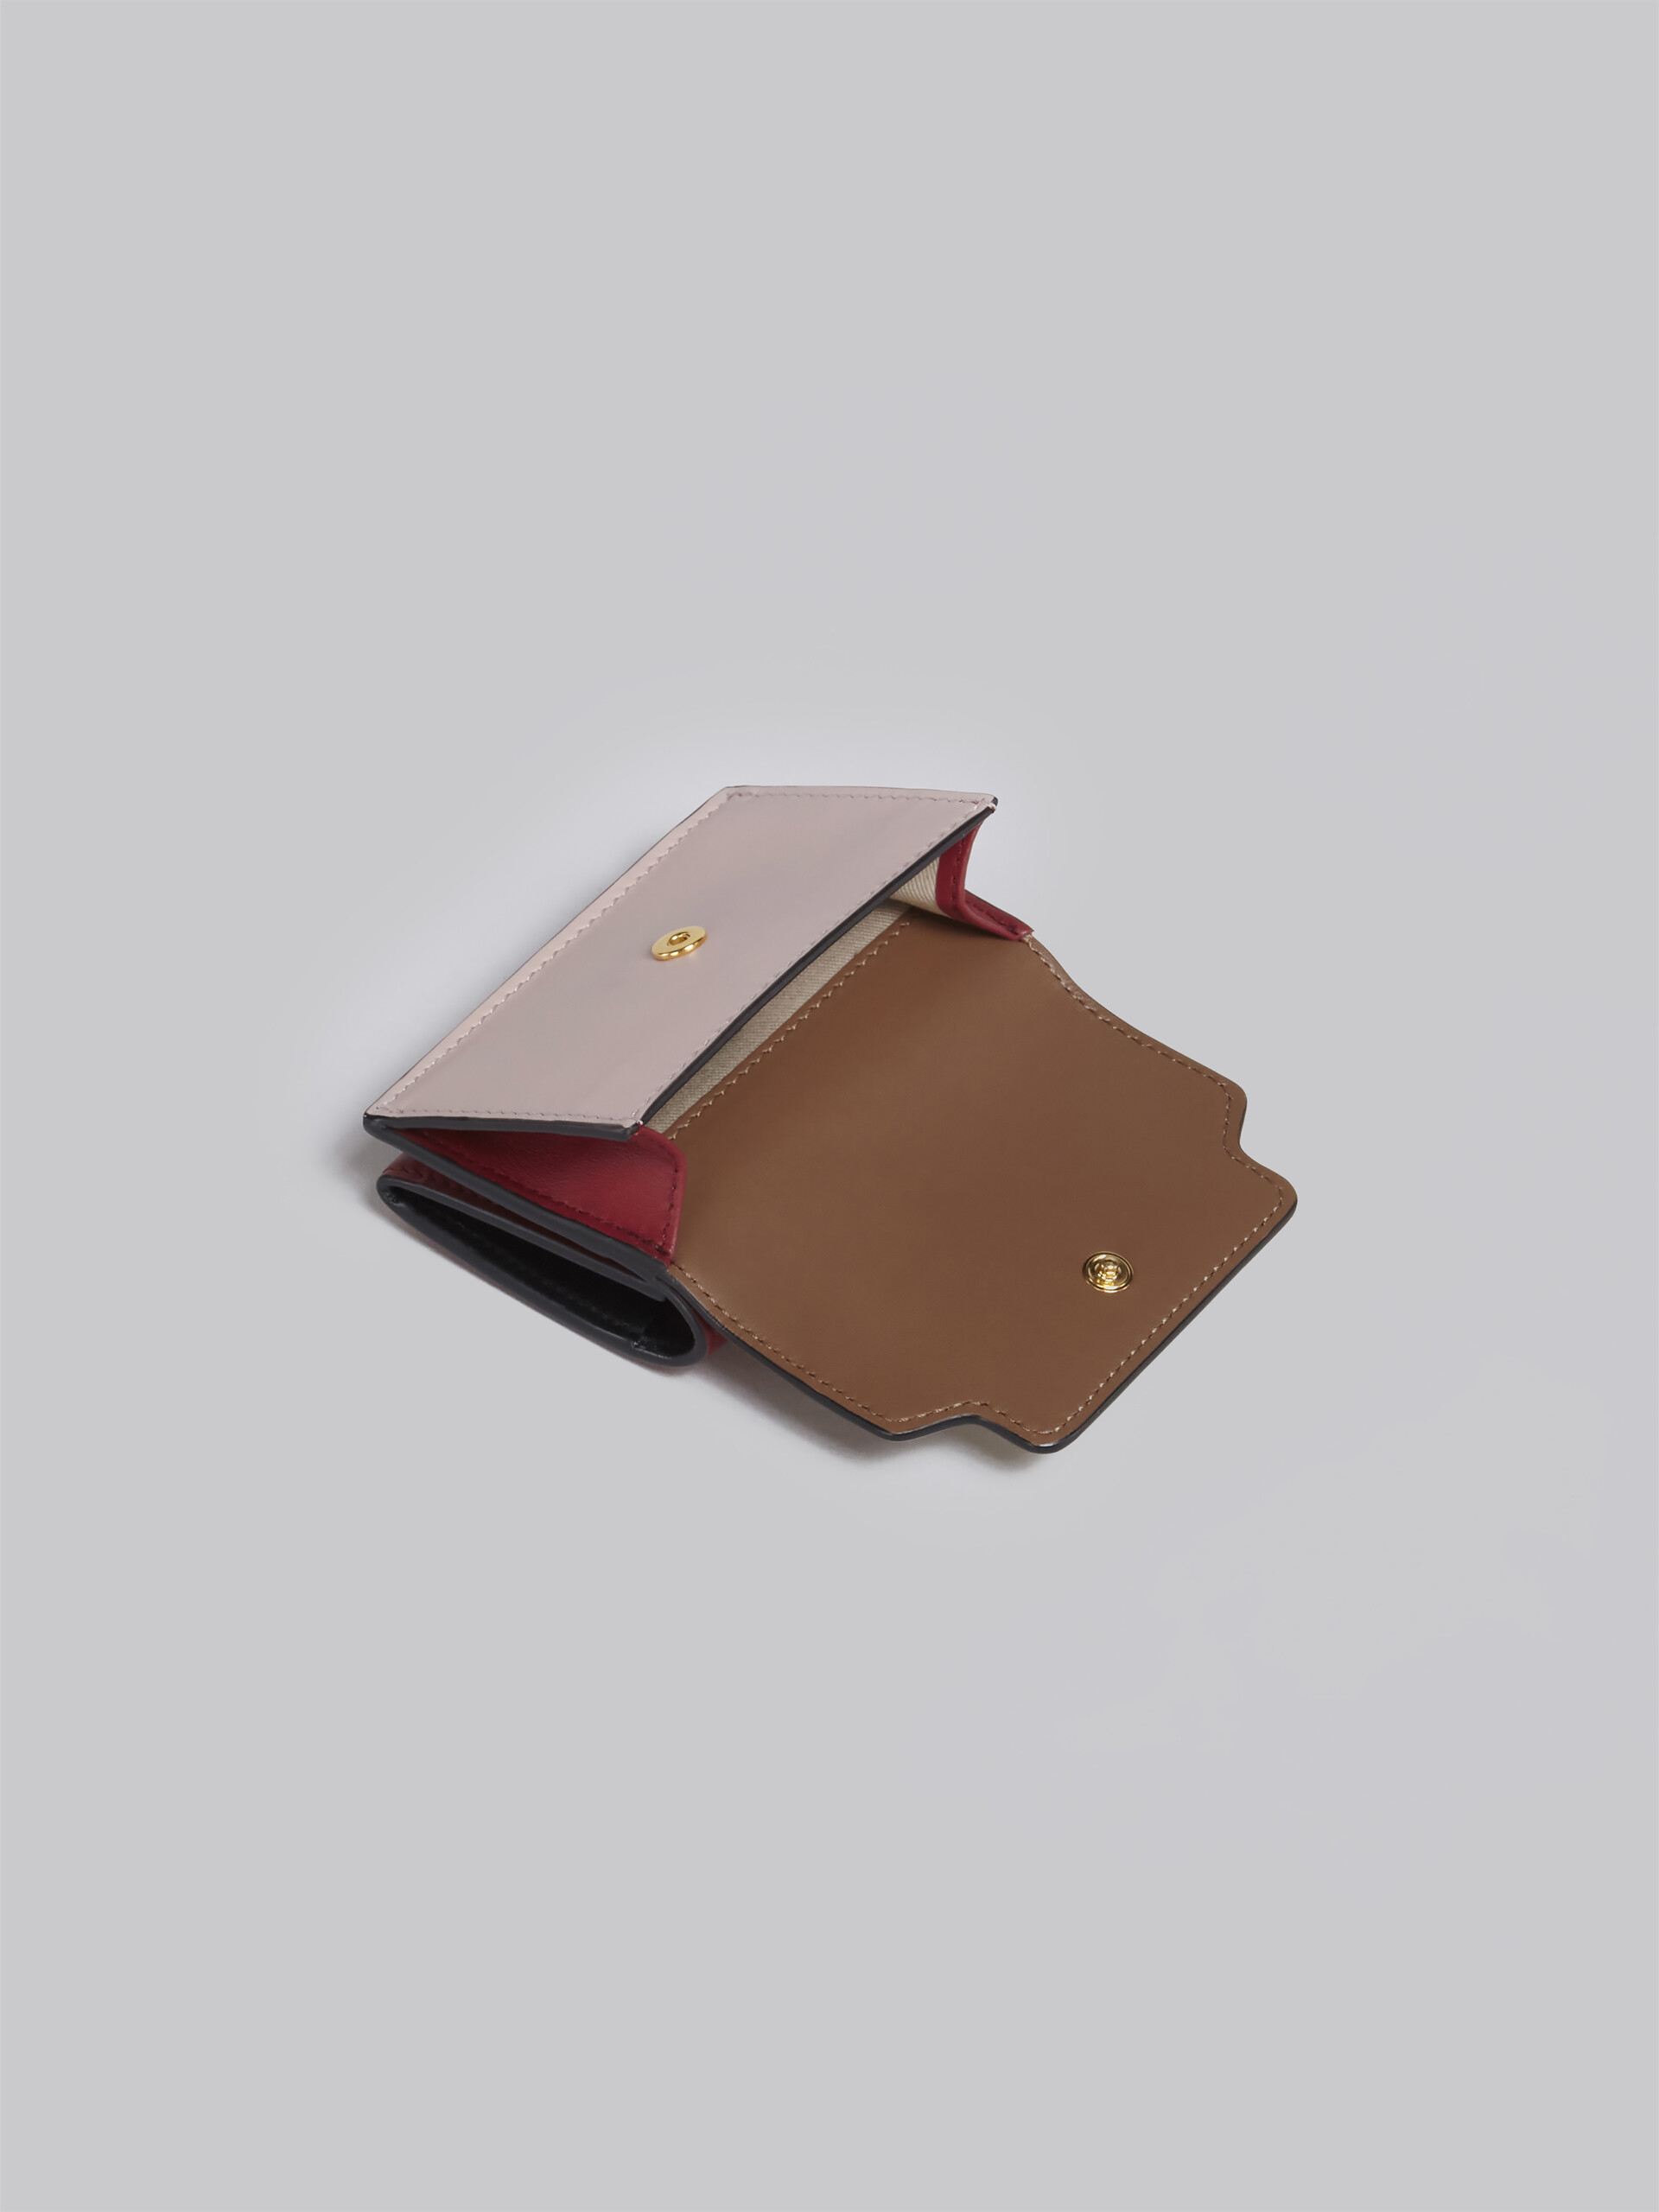 Tri-fold wallet in brown pink and burgundy saffiano leather - Wallets - Image 5